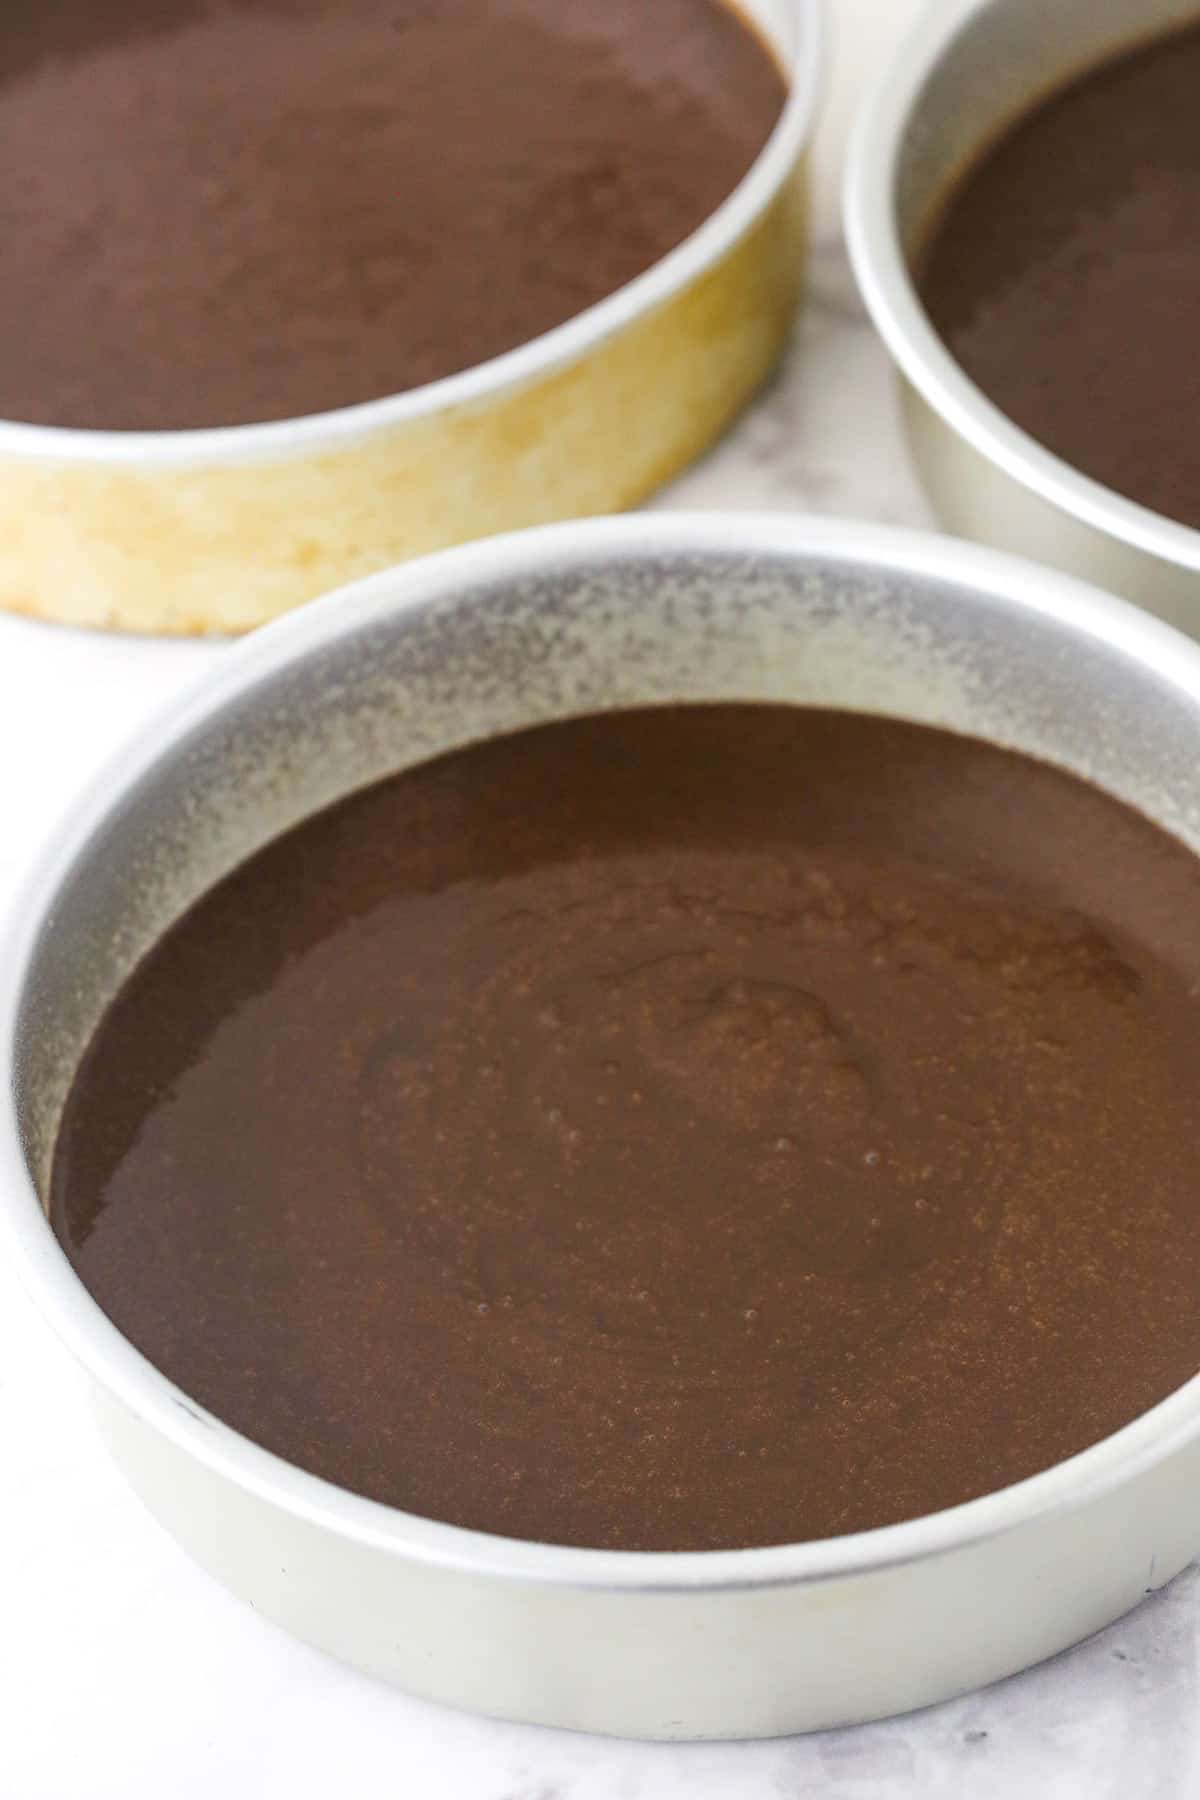 Unbaked chocolate cakes in pans ready to go into the oven